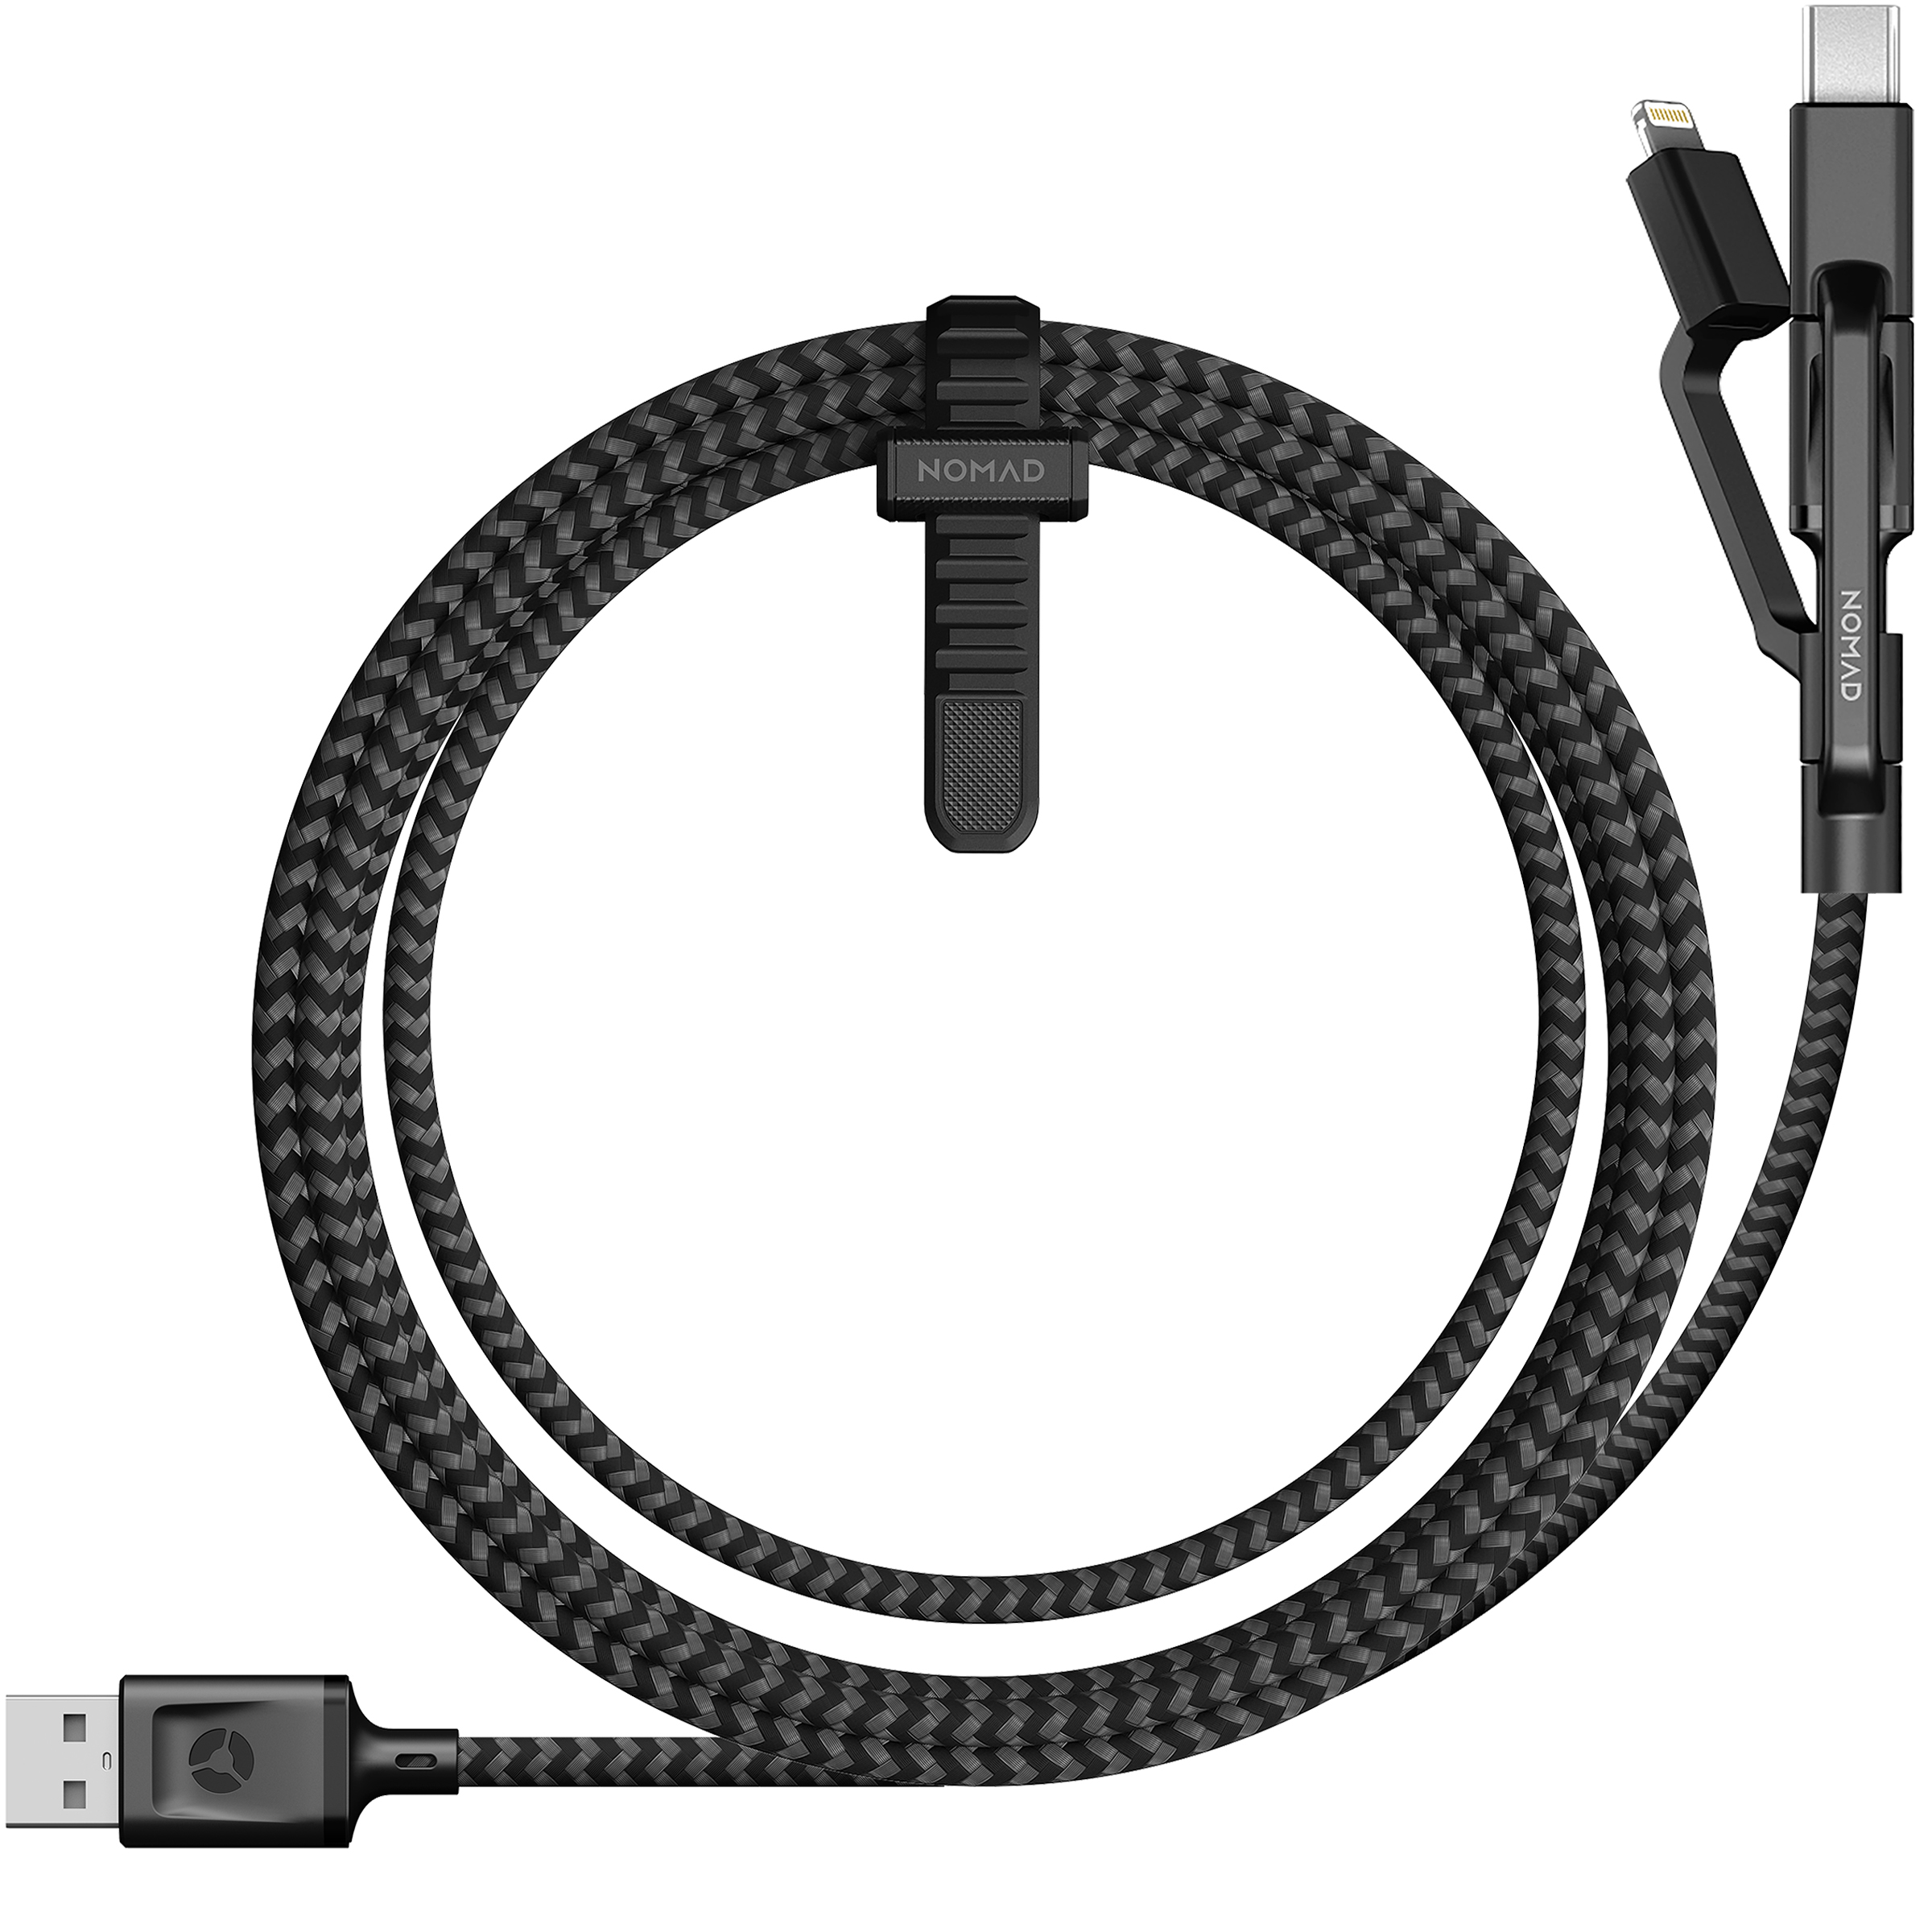 Nomad Universal Cable Black 1.5m